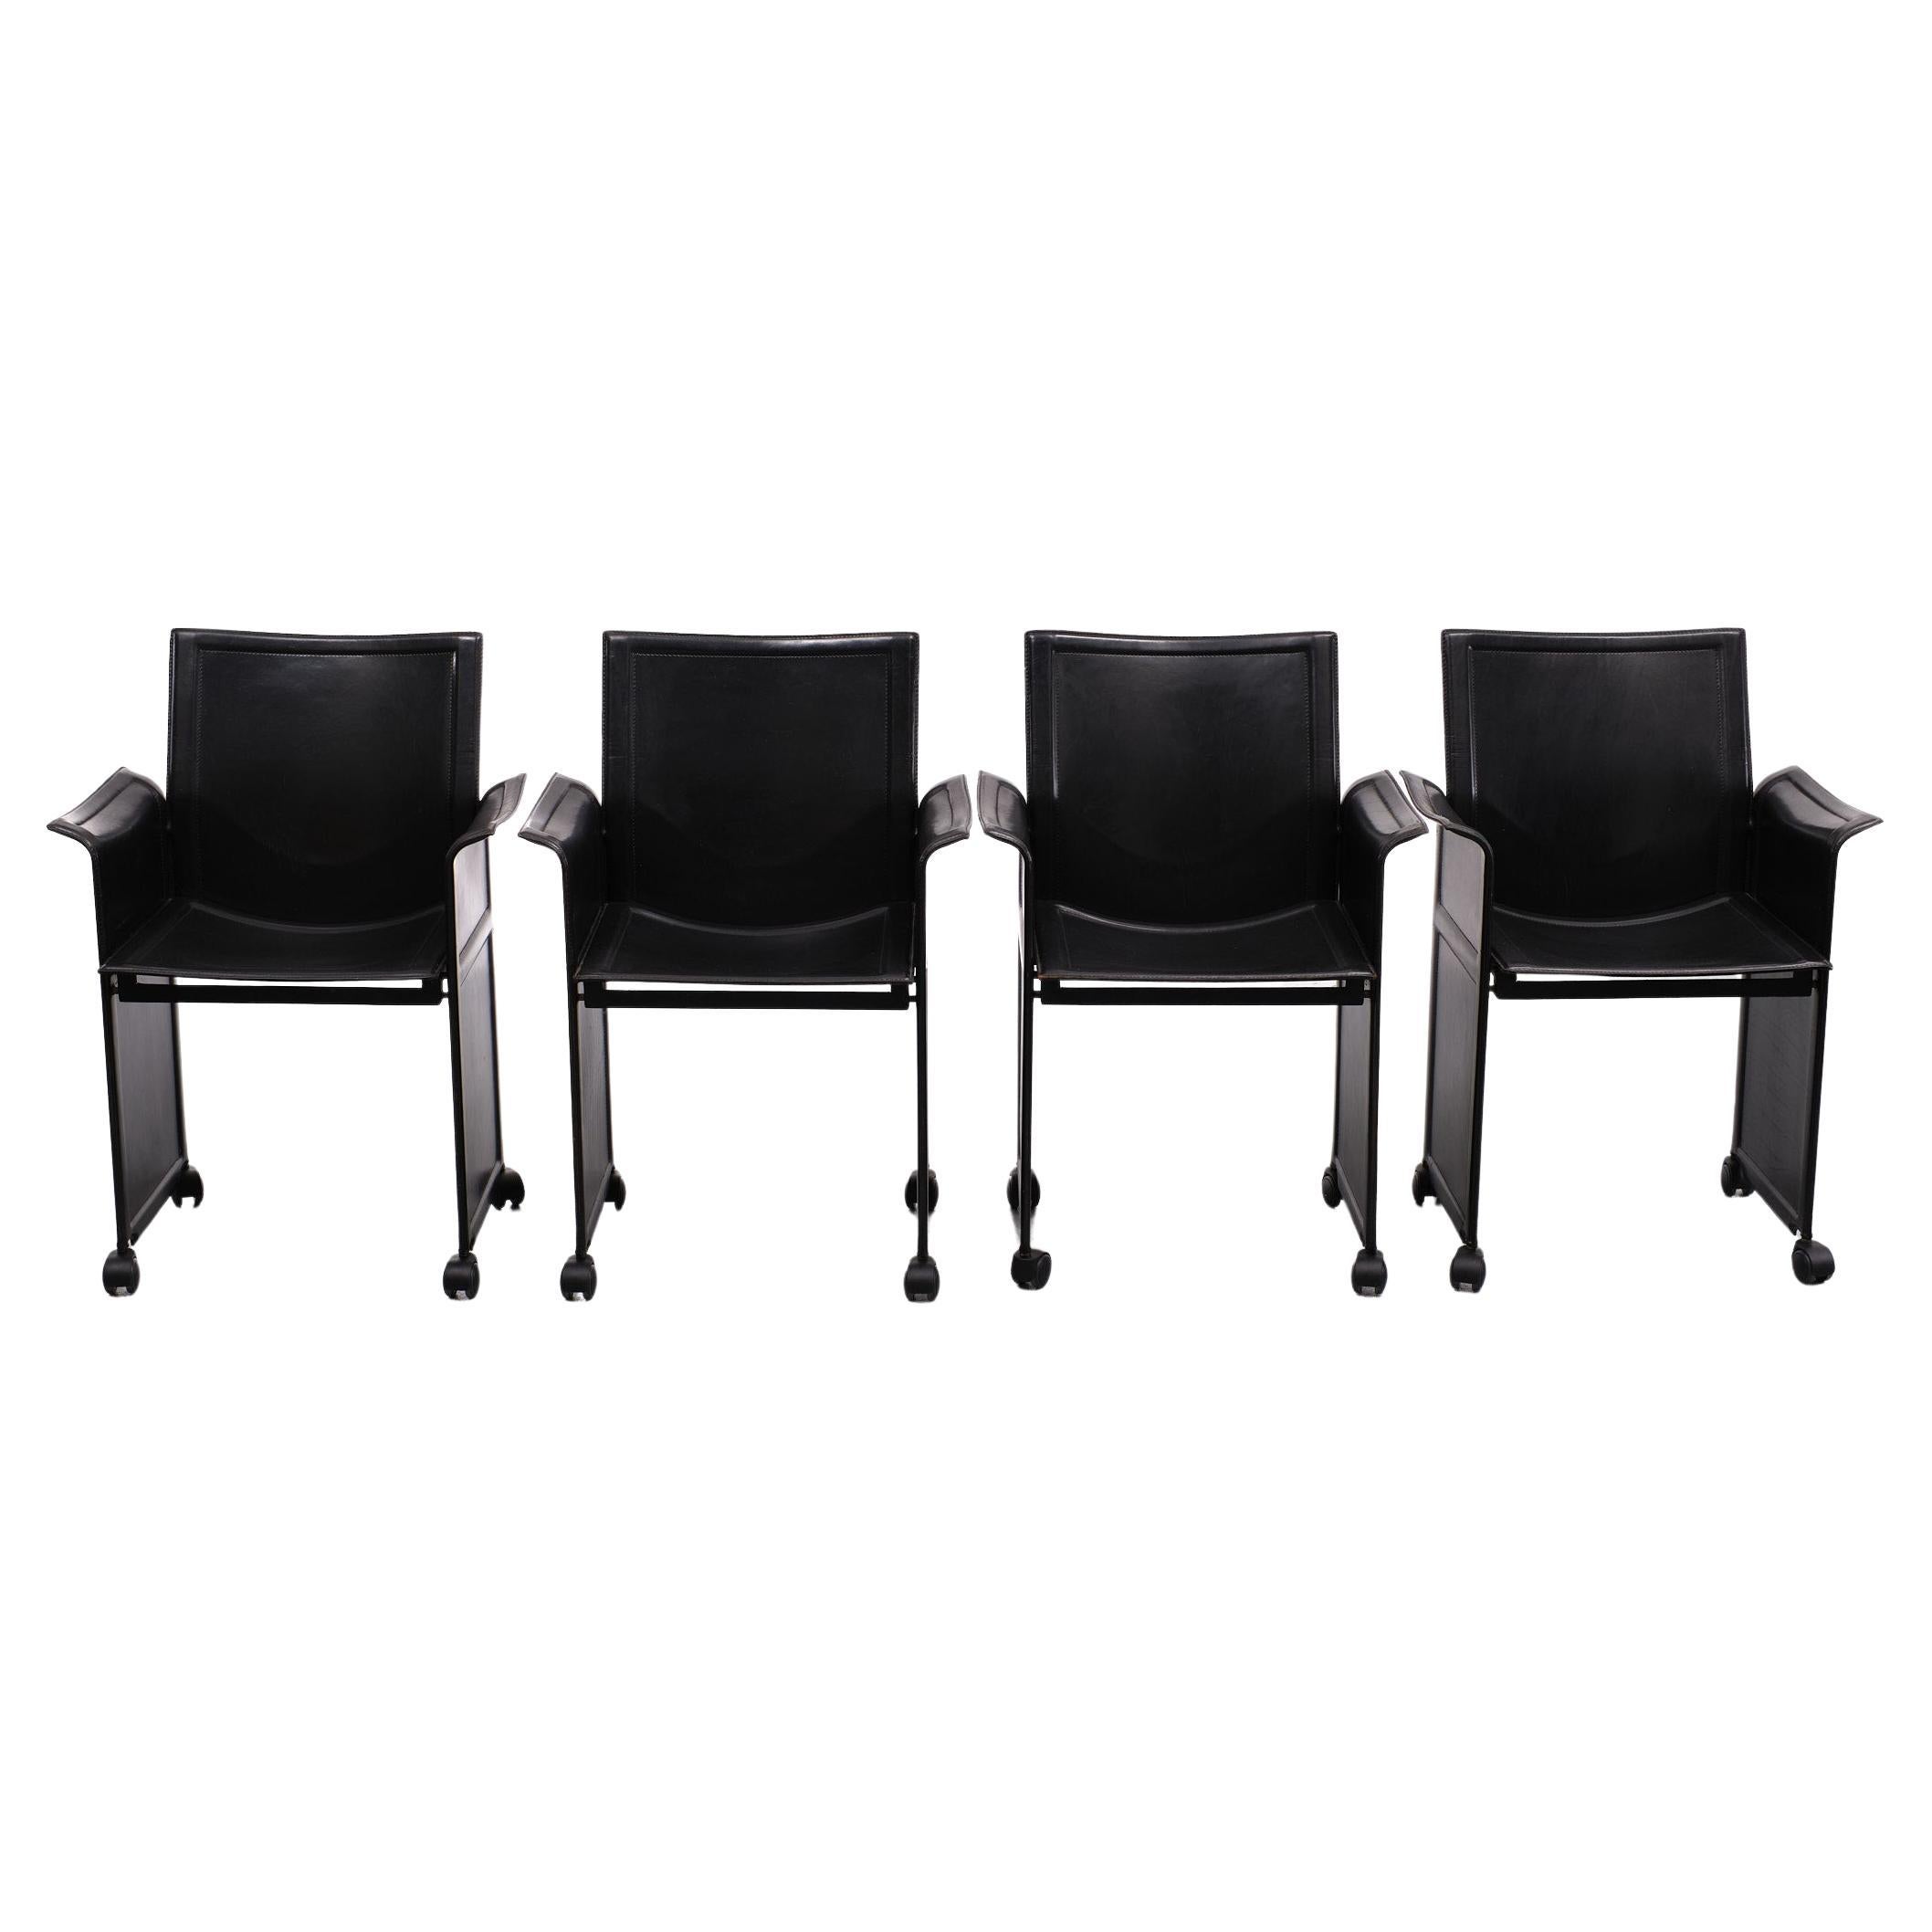 Set of 4 of black Korium armchairs on wheels designed by Tito Agnoli for Matteo Grassi in 1978. All new wheels. Signed. Steel frame complete covered with thick black leather. Great seating comfort. 

Tito Agnoli was an assistant to Gio Ponti at